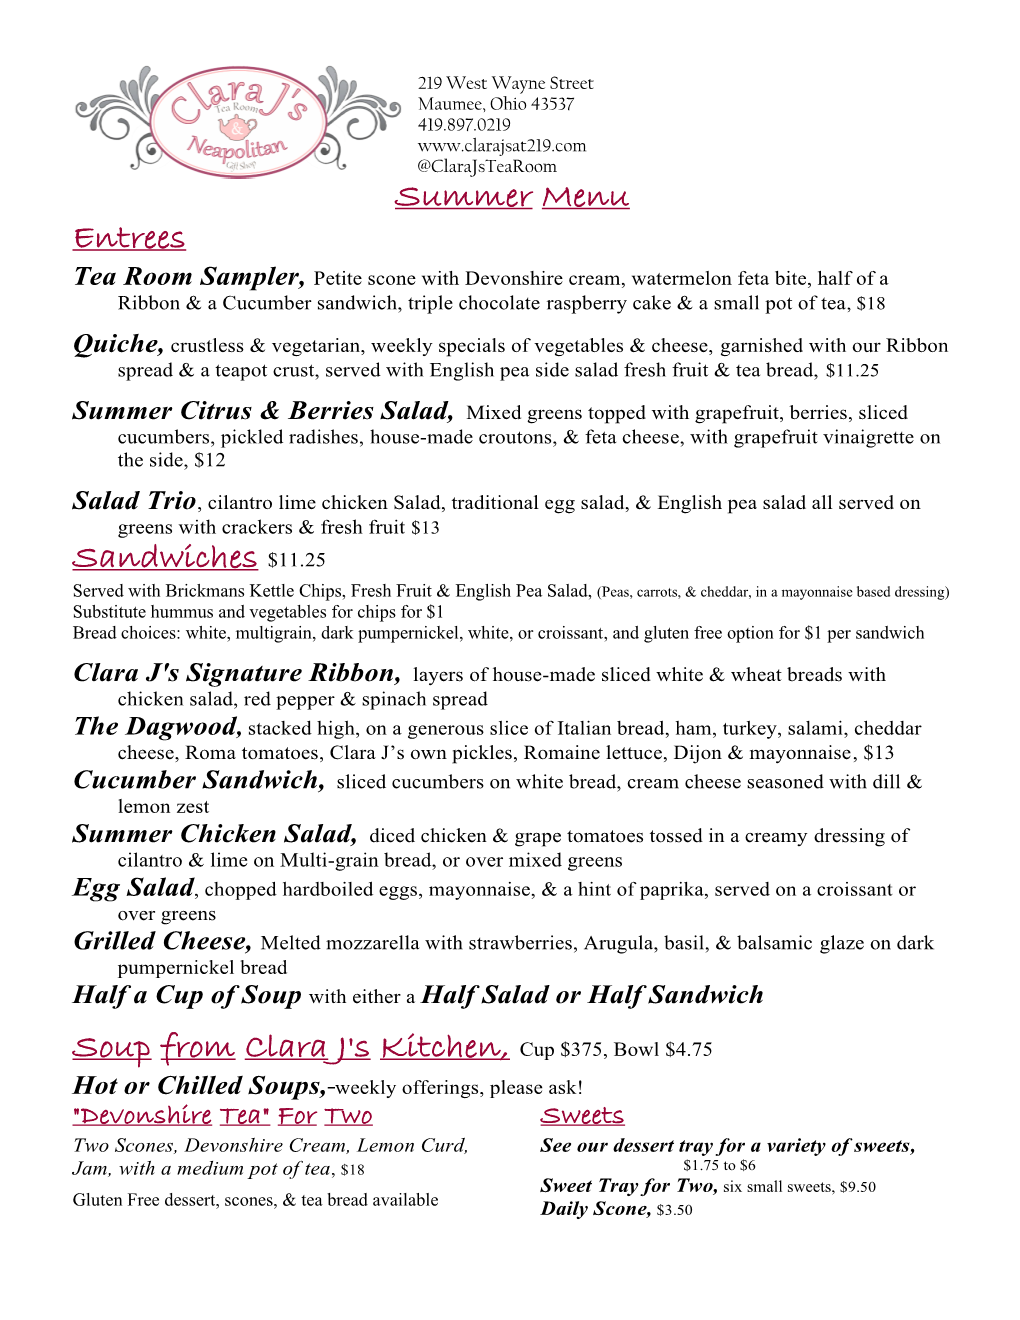 Summer Menu Entrees Sandwiches $11.25 Soup from Clara J's Kitchen